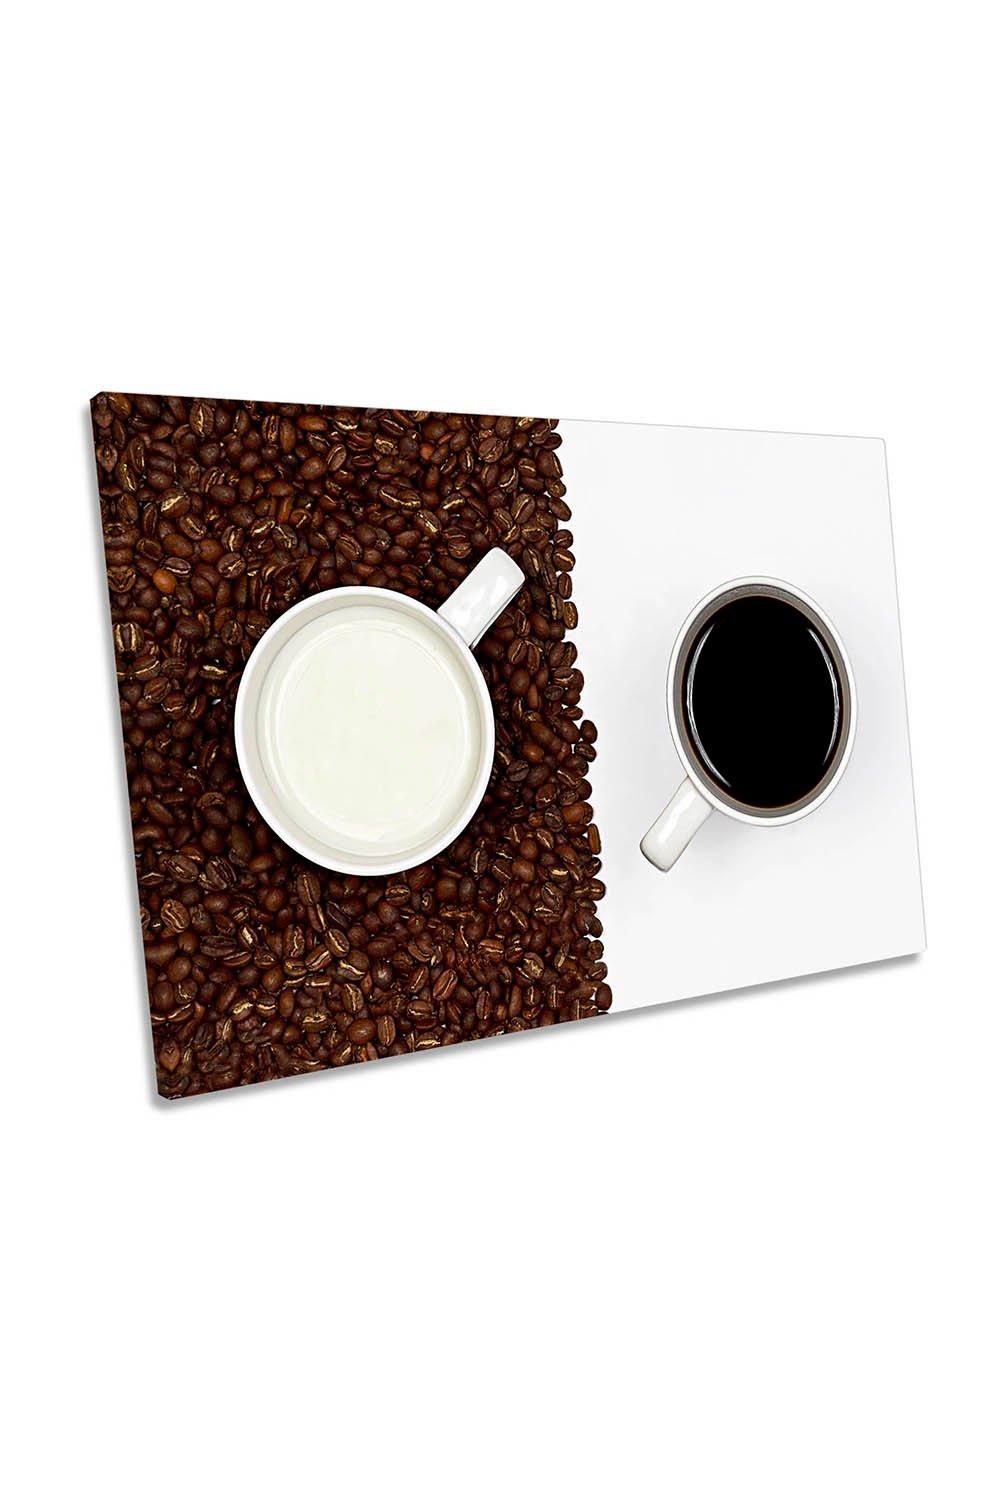 Yin Yang Coffee Cups Kitchen Canvas Wall Art Picture Print